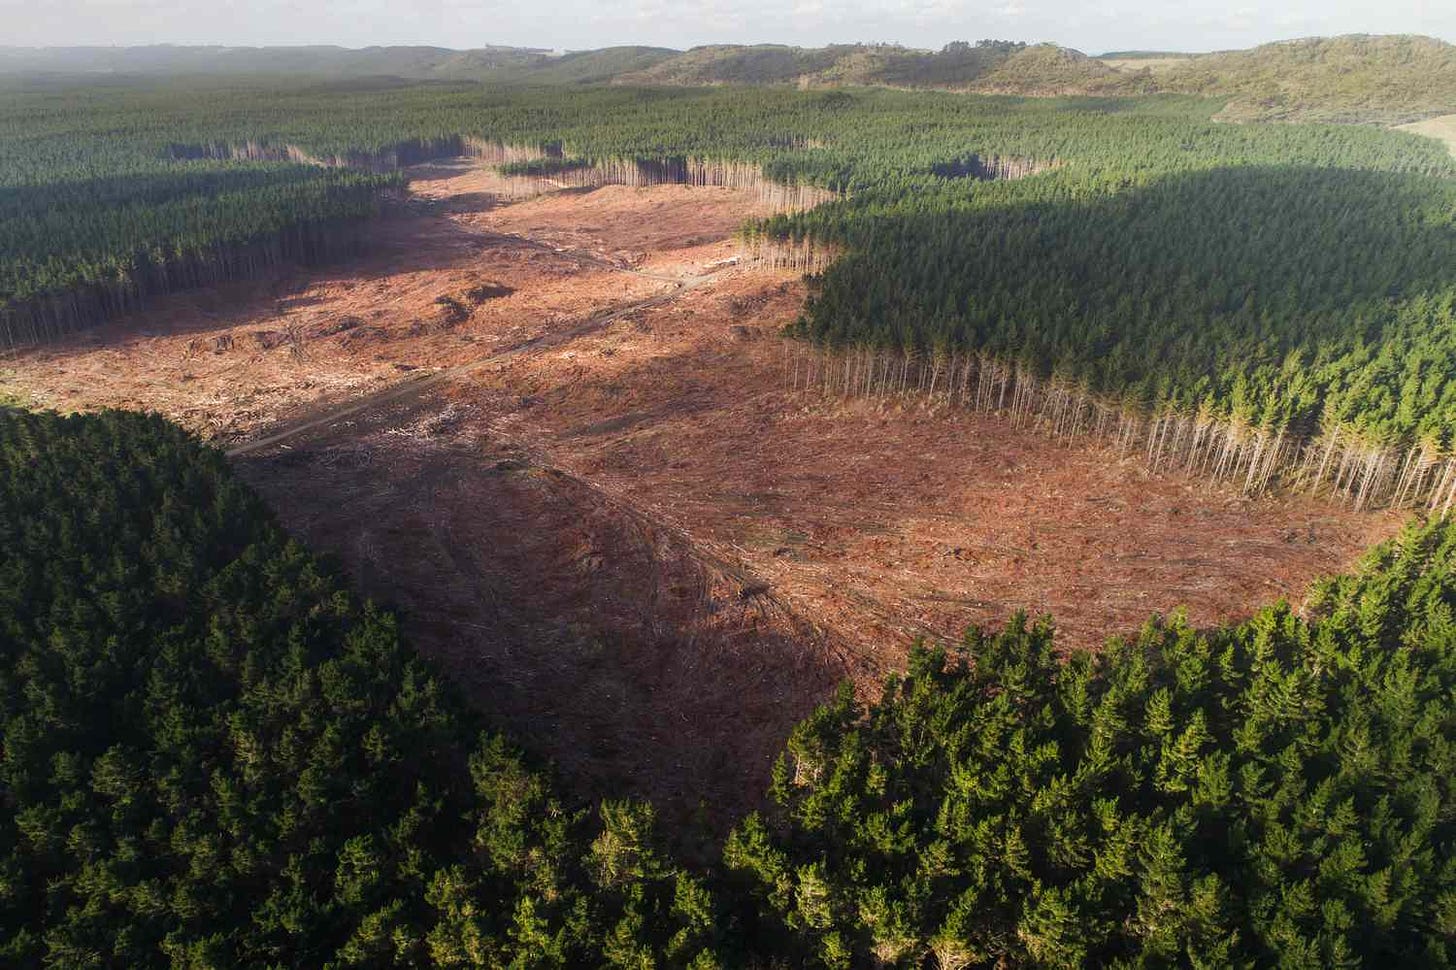 The Debate Over the Clearcutting Method